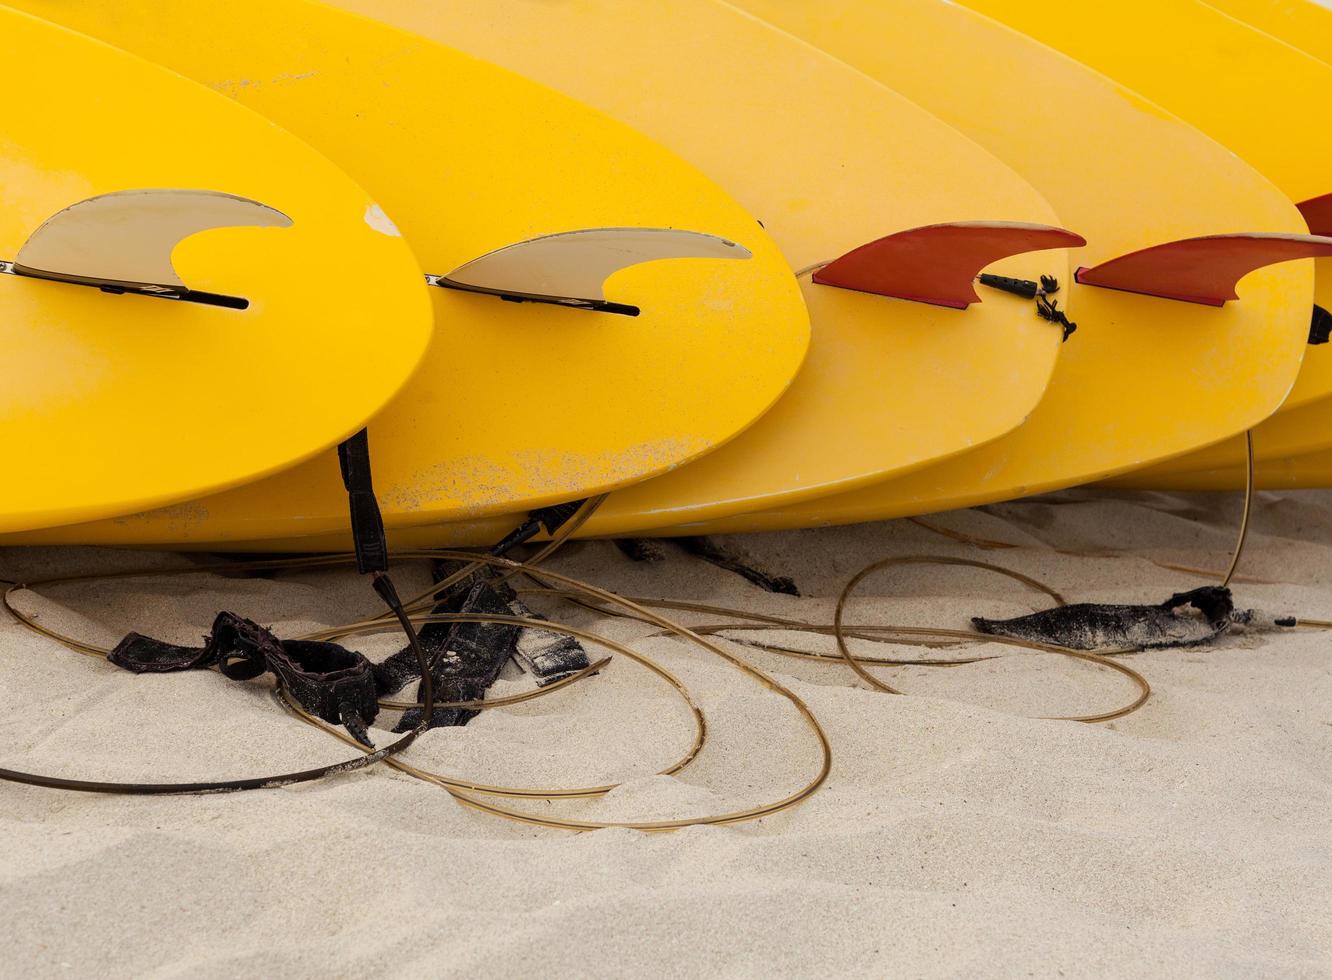 Row of surfboards photo